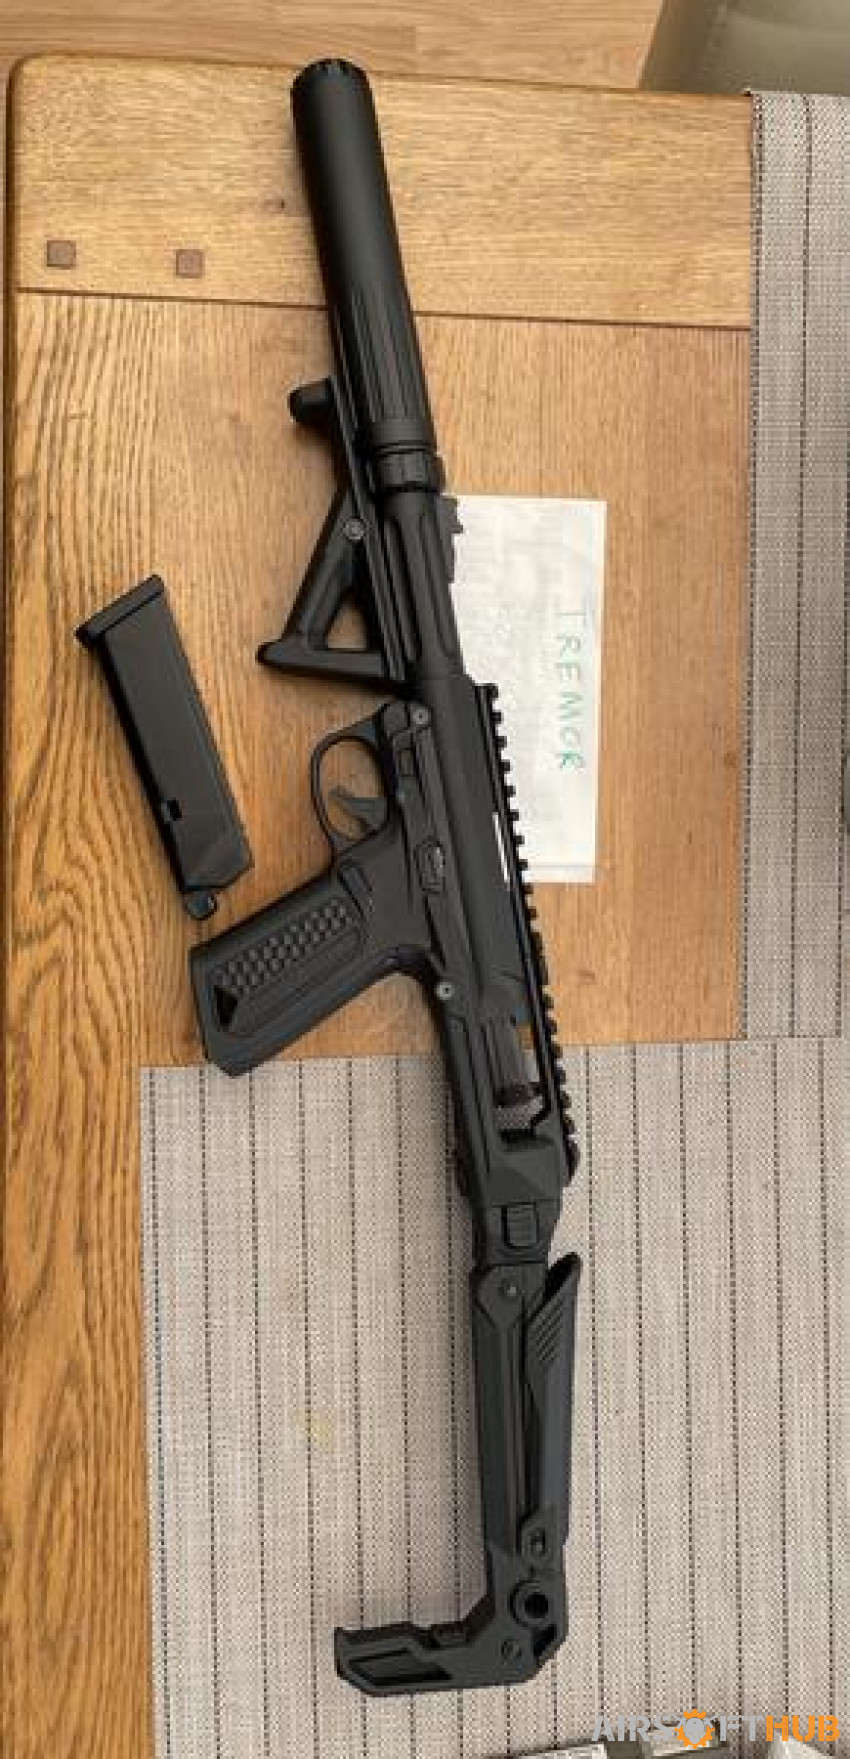 AAP pistol and DMR kit - Used airsoft equipment